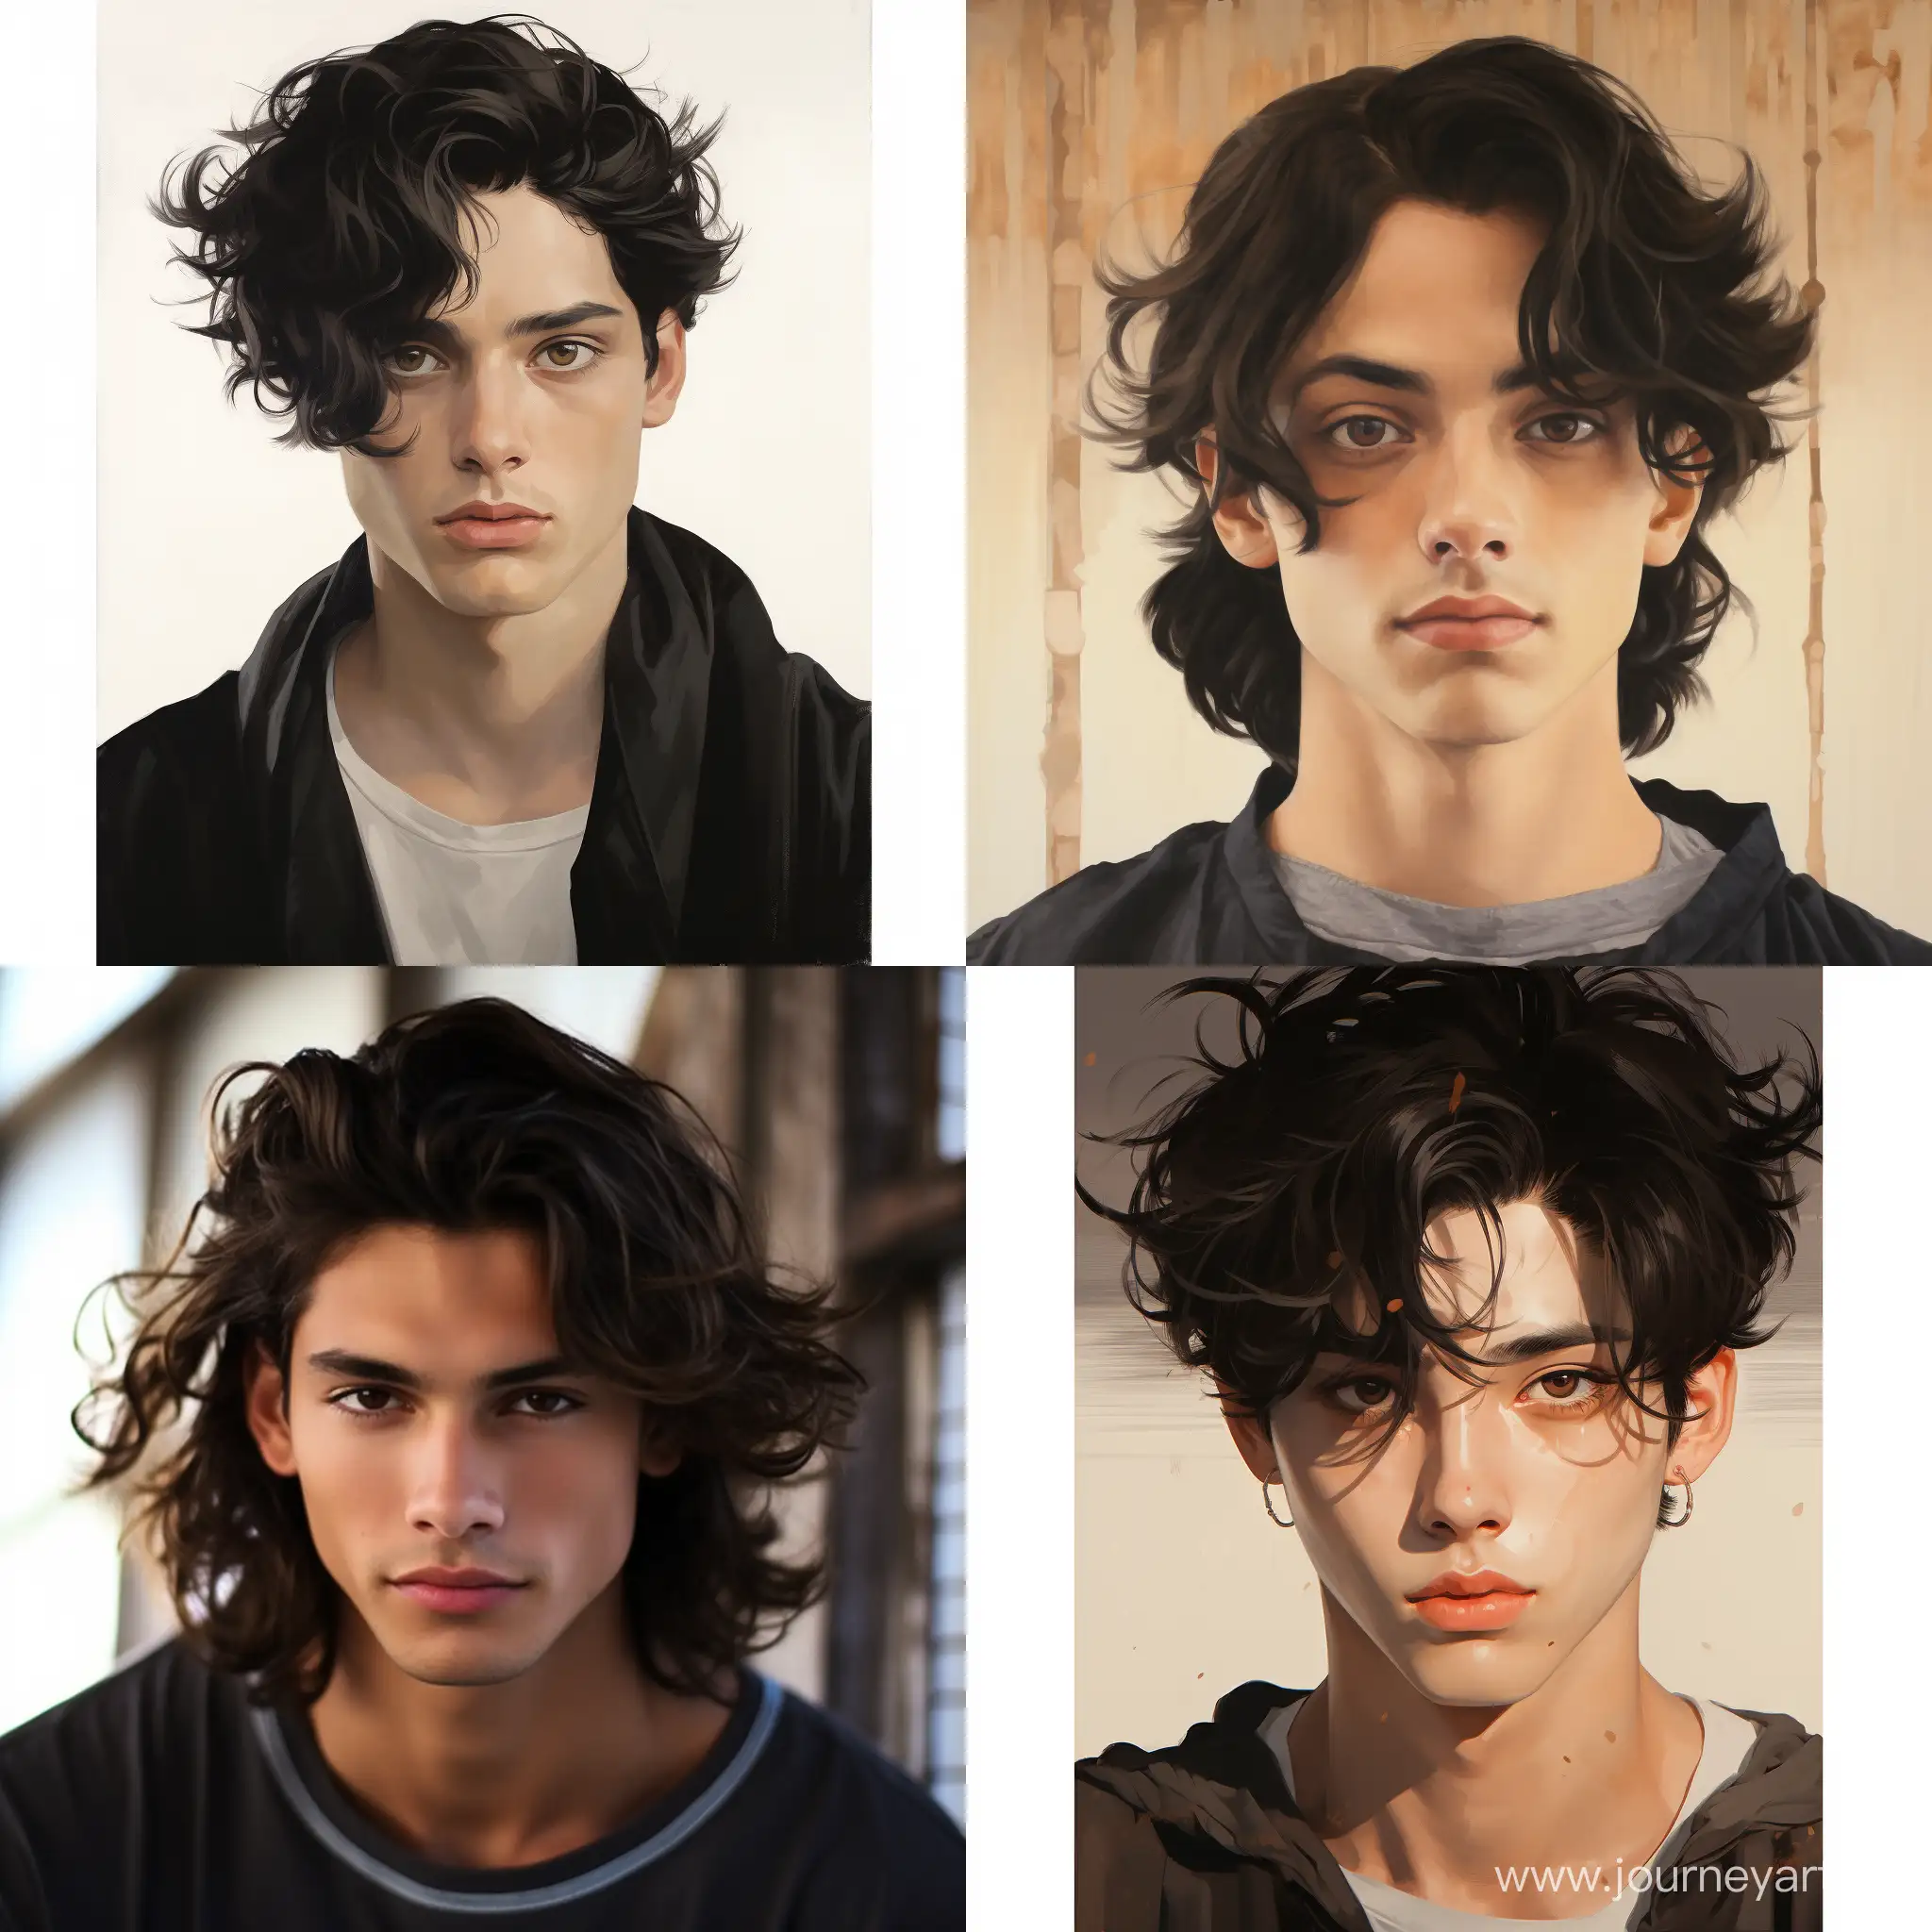 Captivating-Portrait-of-a-20YearOld-Man-with-Black-Hair-and-HoneyColored-Eyes